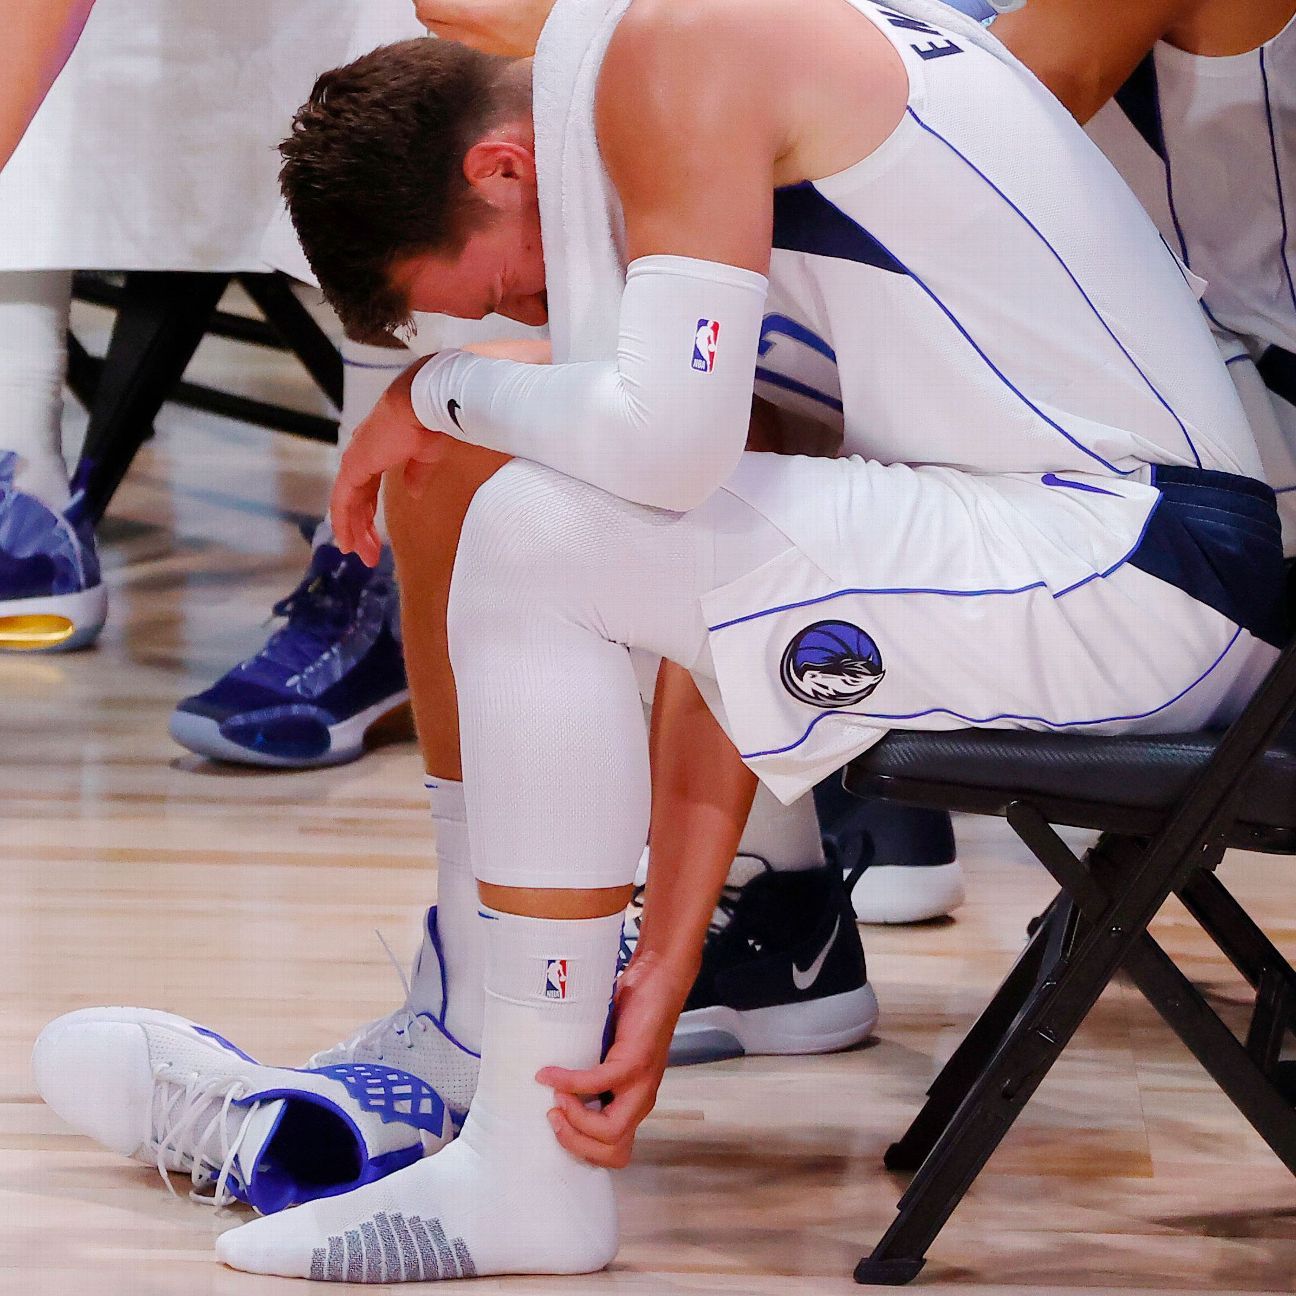 Luka Doncic questionable for Game 4 with ankle sprain